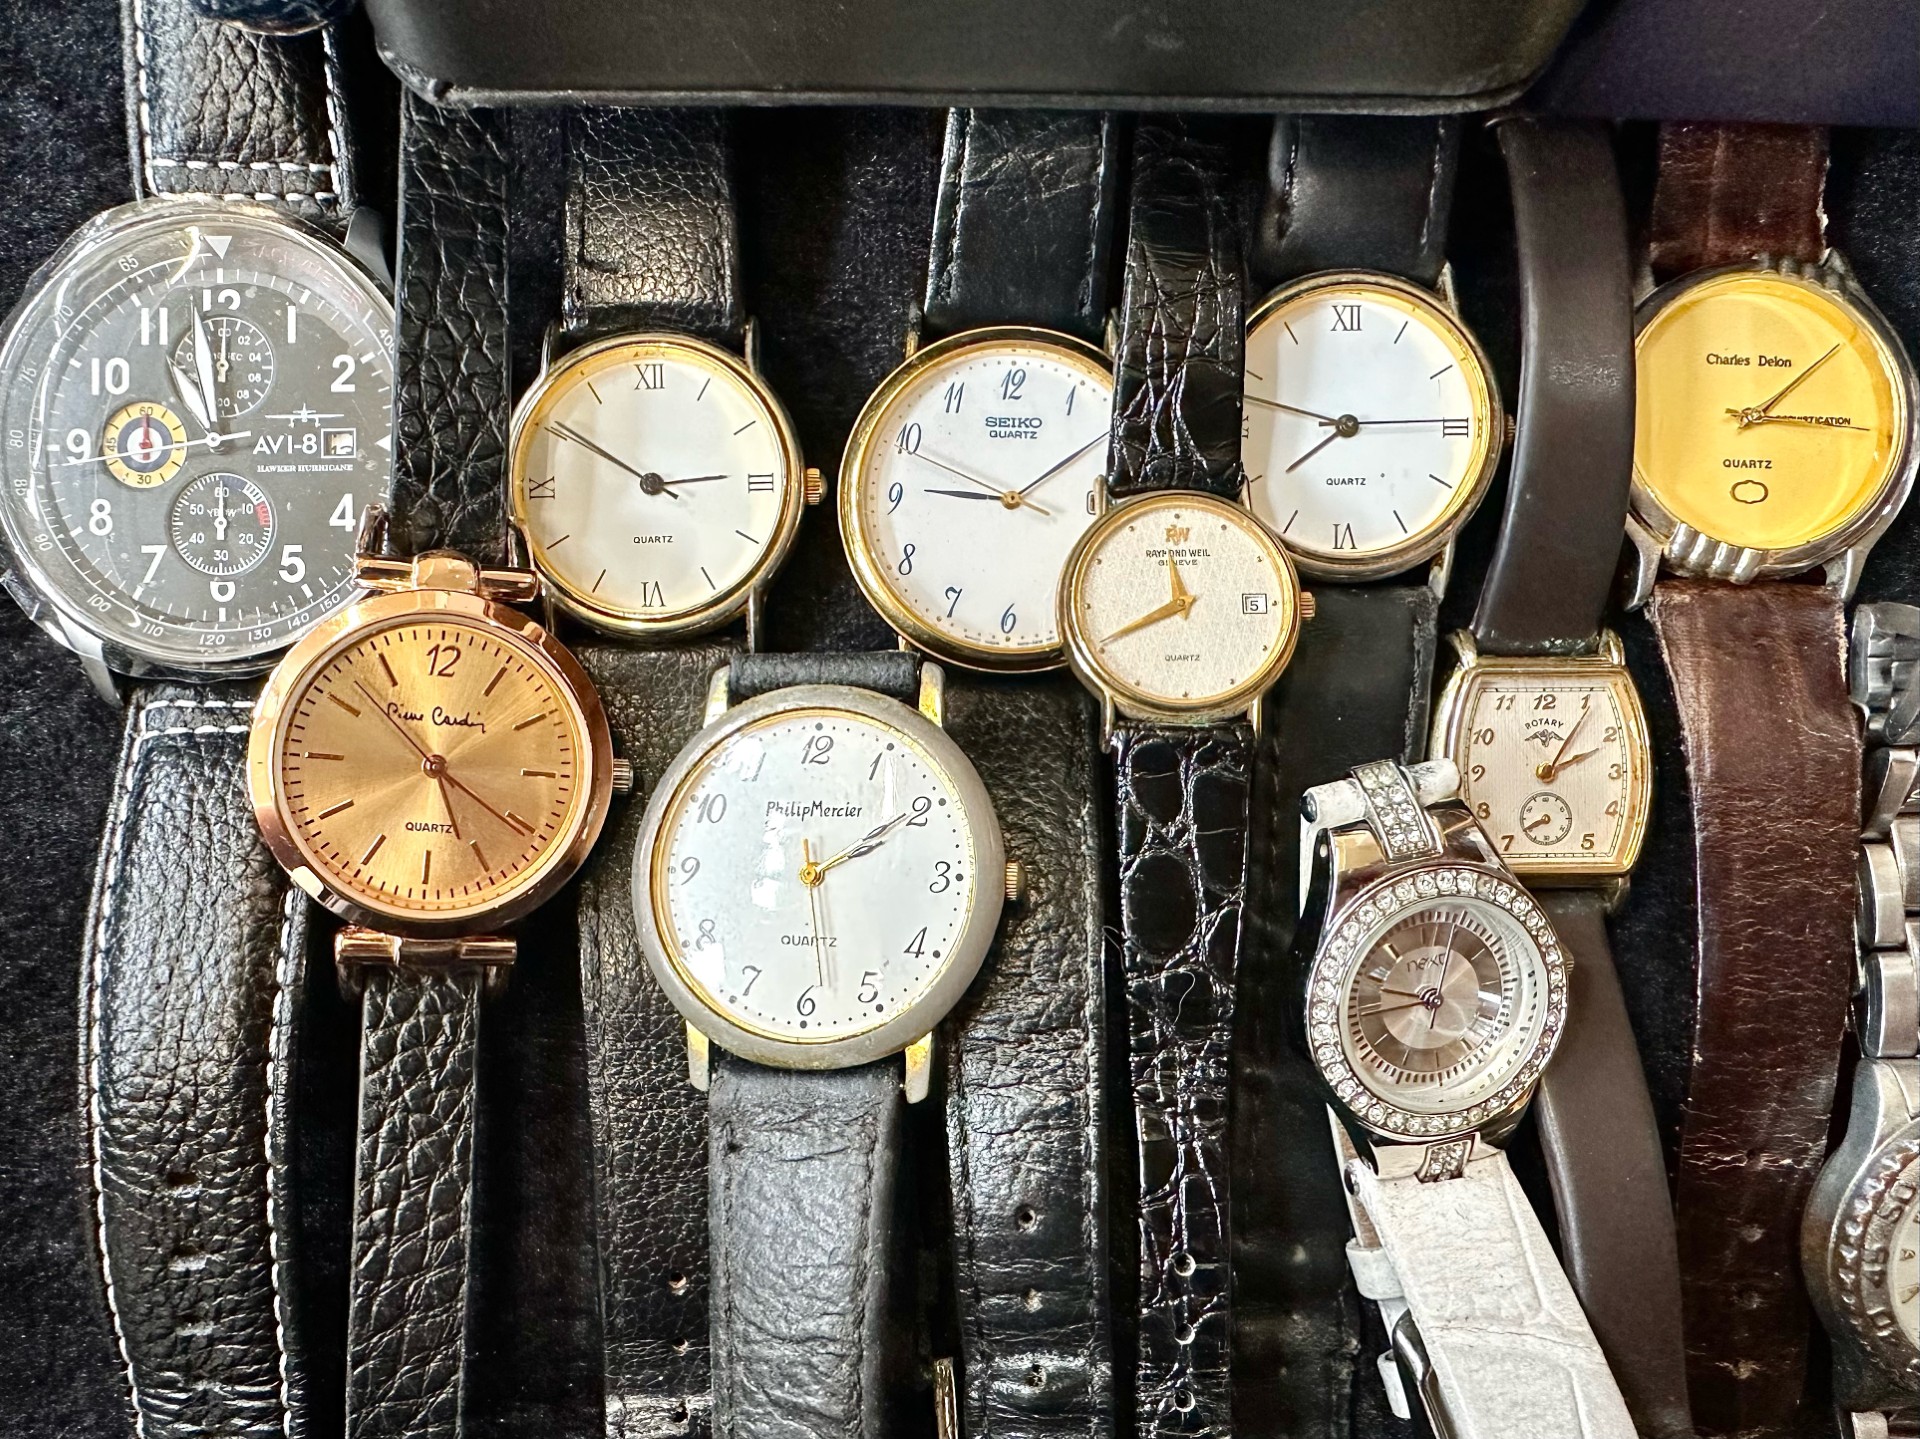 Collection of Ladies & Gentleman's Wristwatches, leather and bracelet straps, makes include Casio, - Image 2 of 6